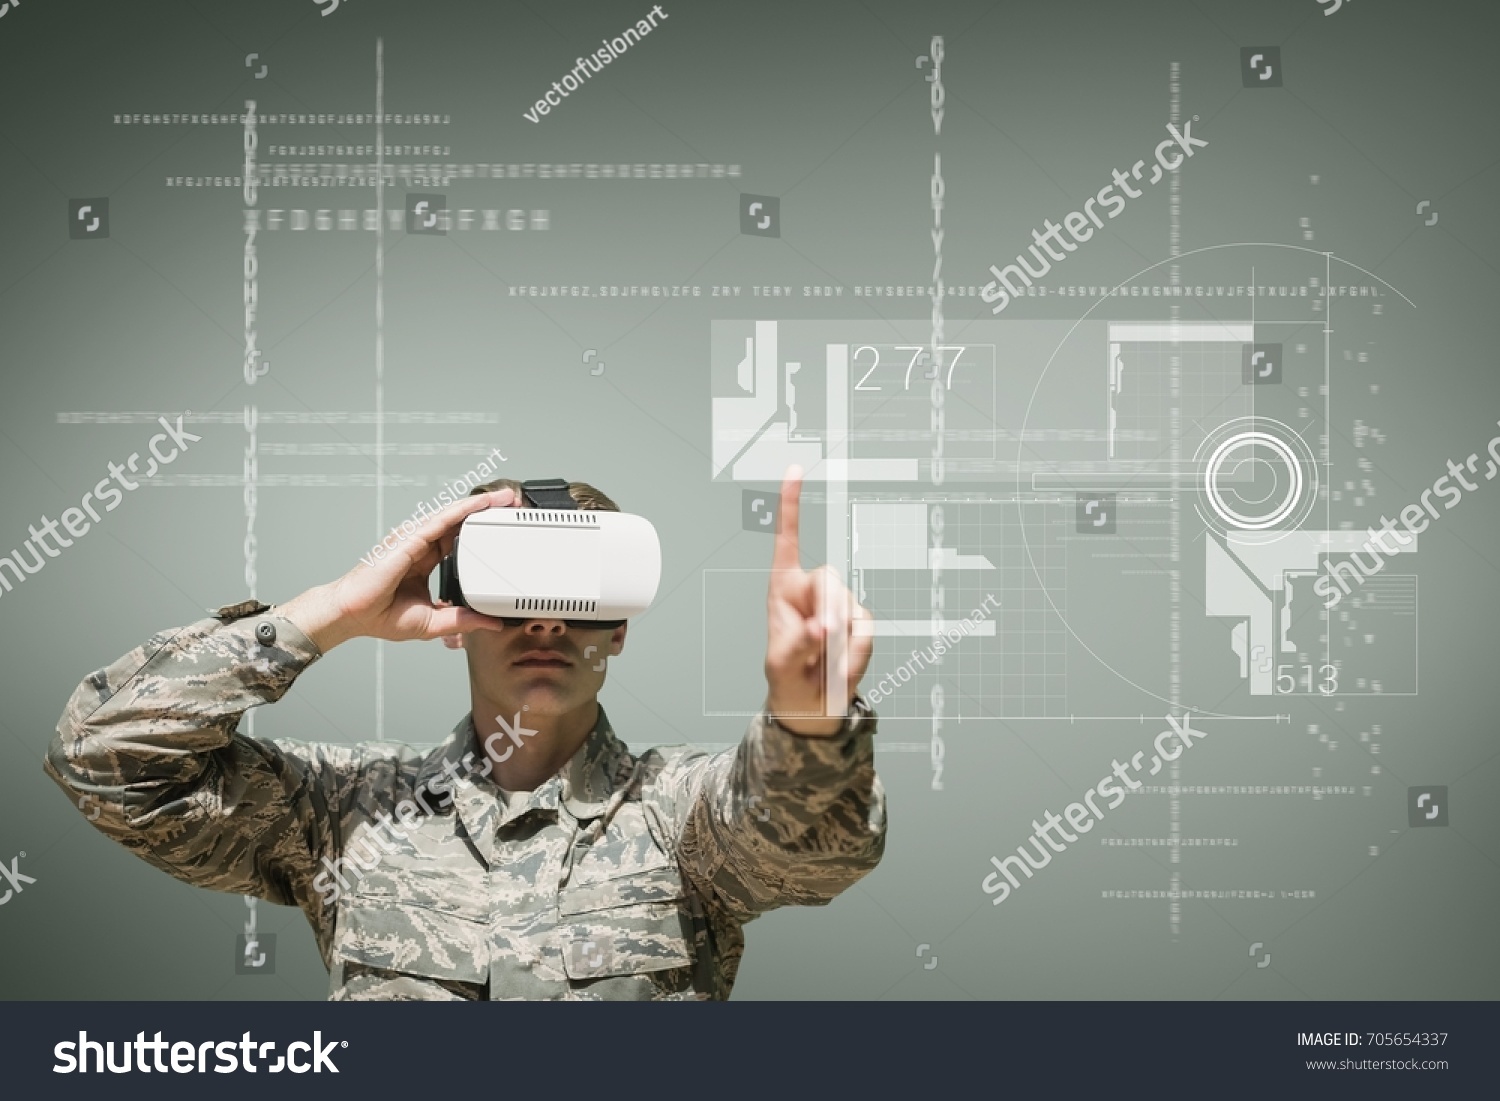 Digital composite of Military man in VR headset touching interface against green background with interfaces #705654337